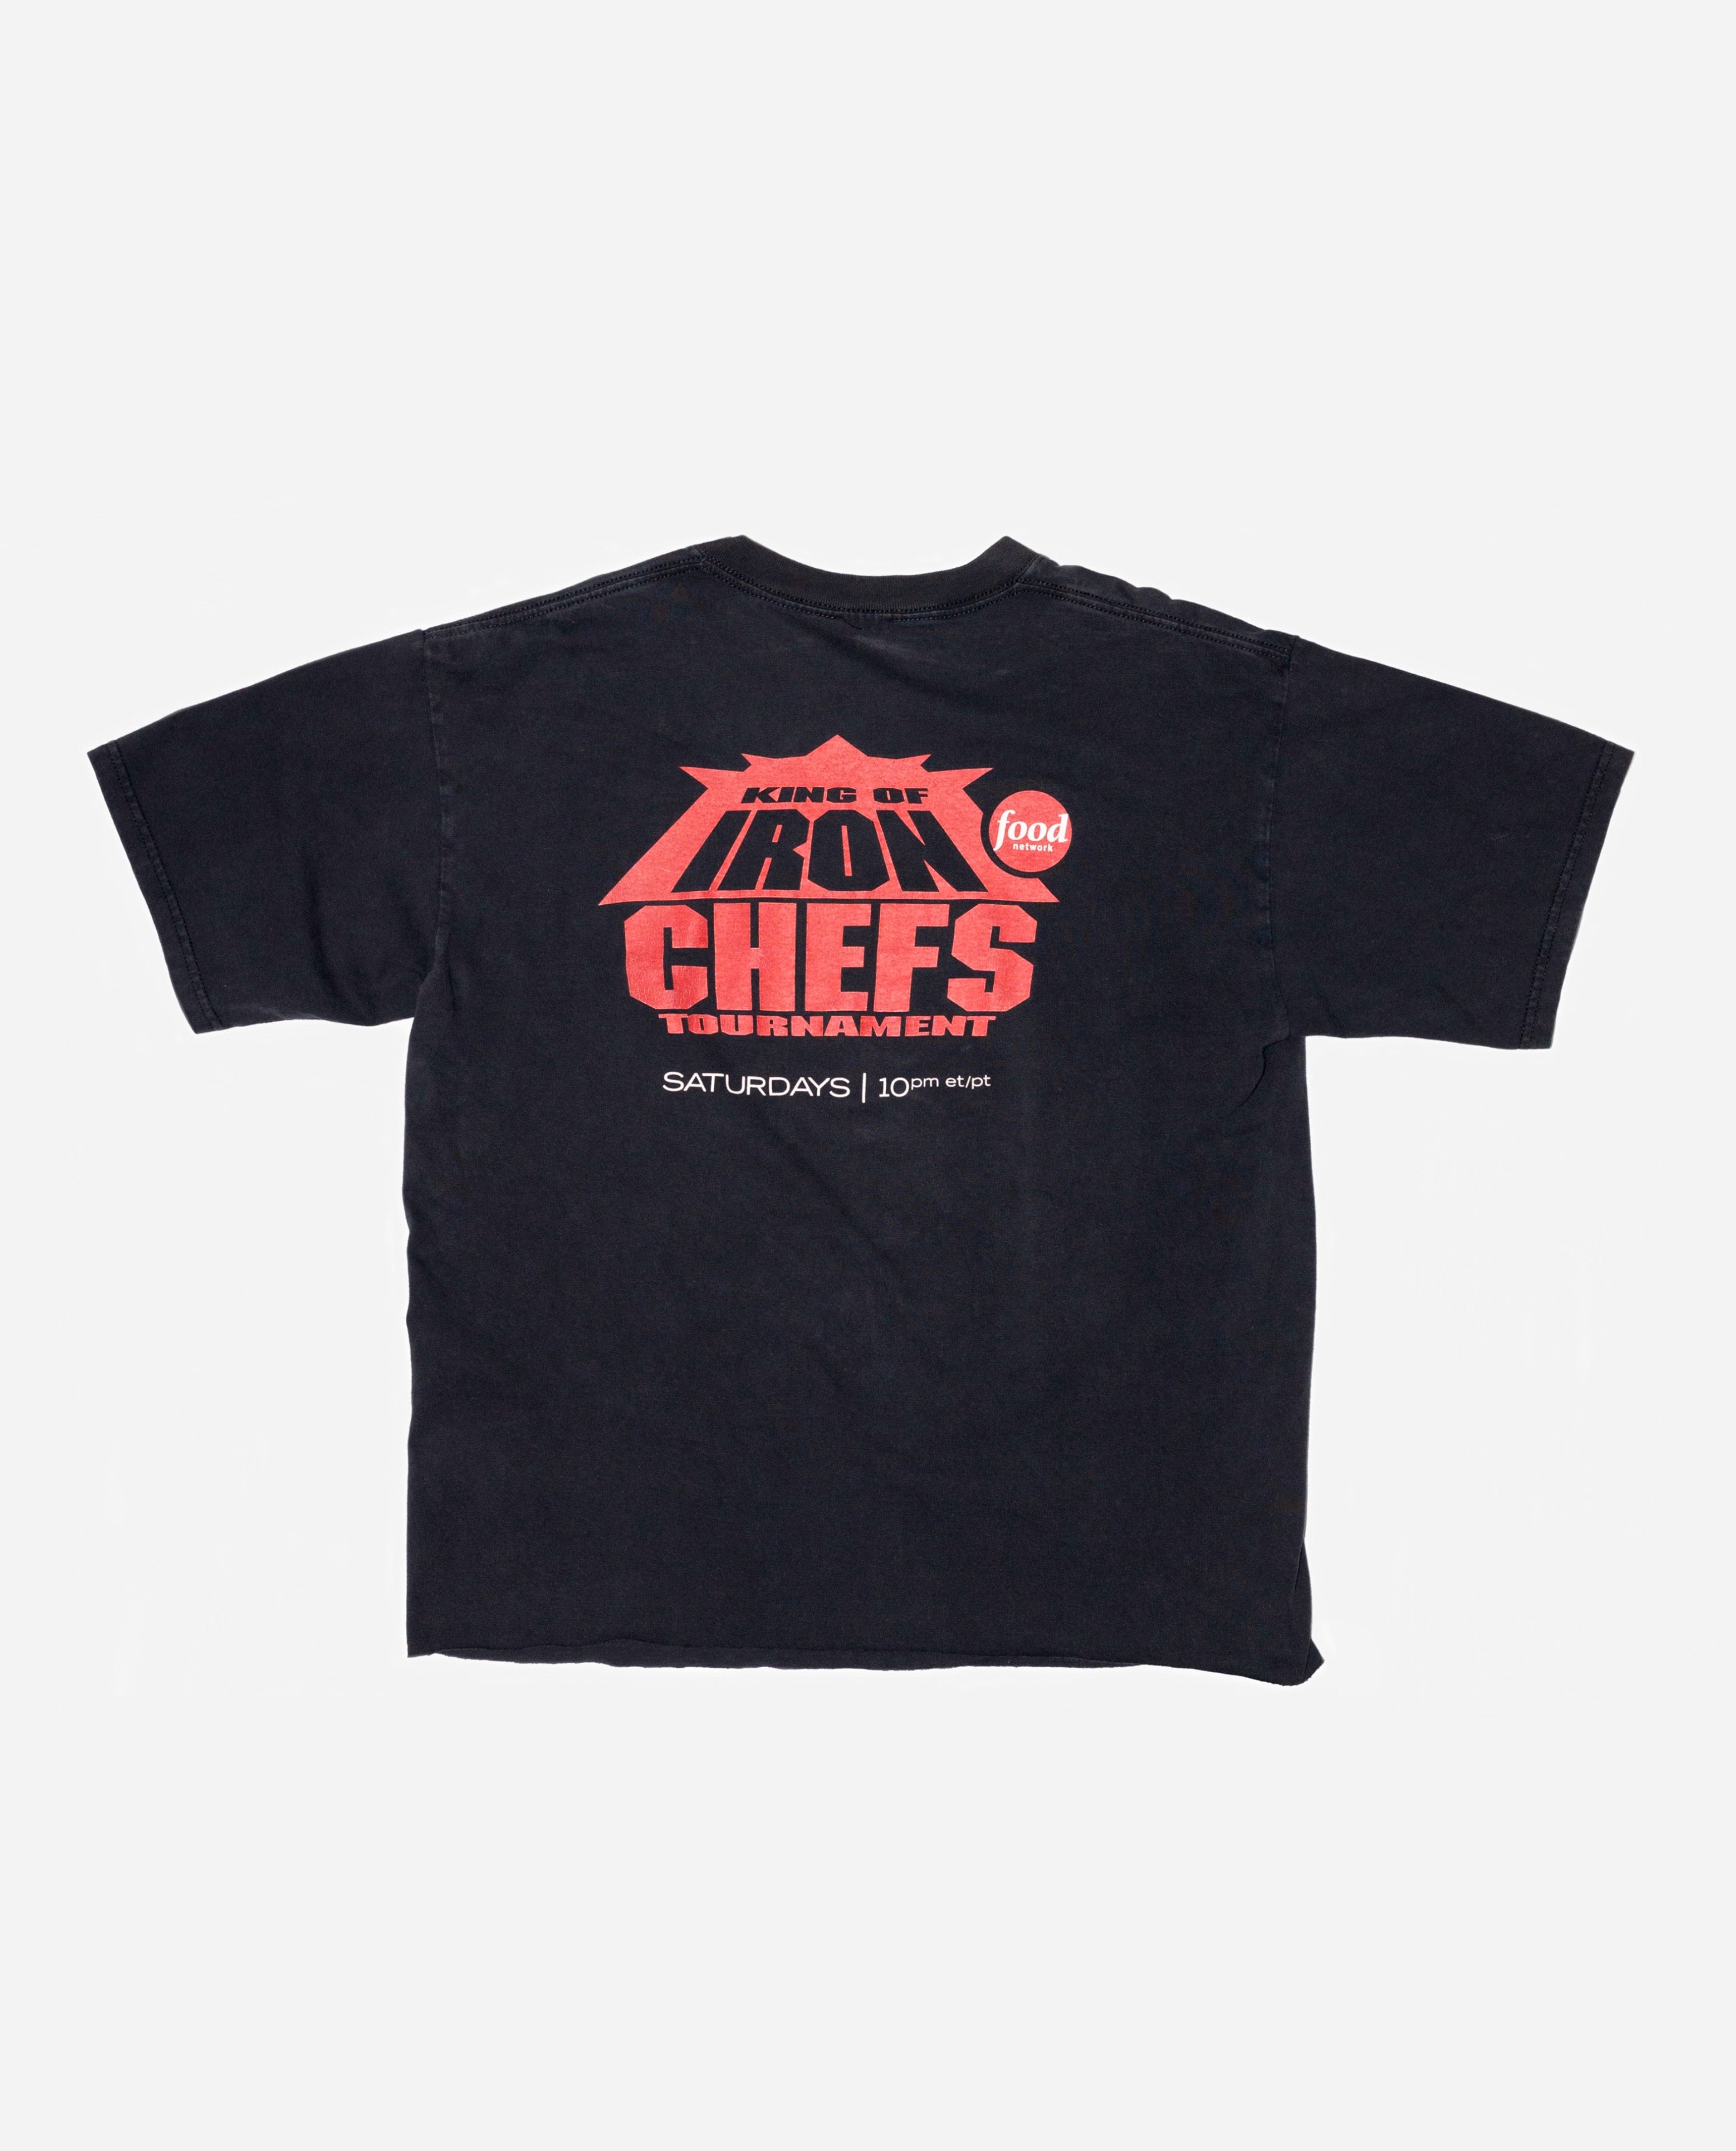 VINTAGE KING OF IRON CHEFS T-SHIRT